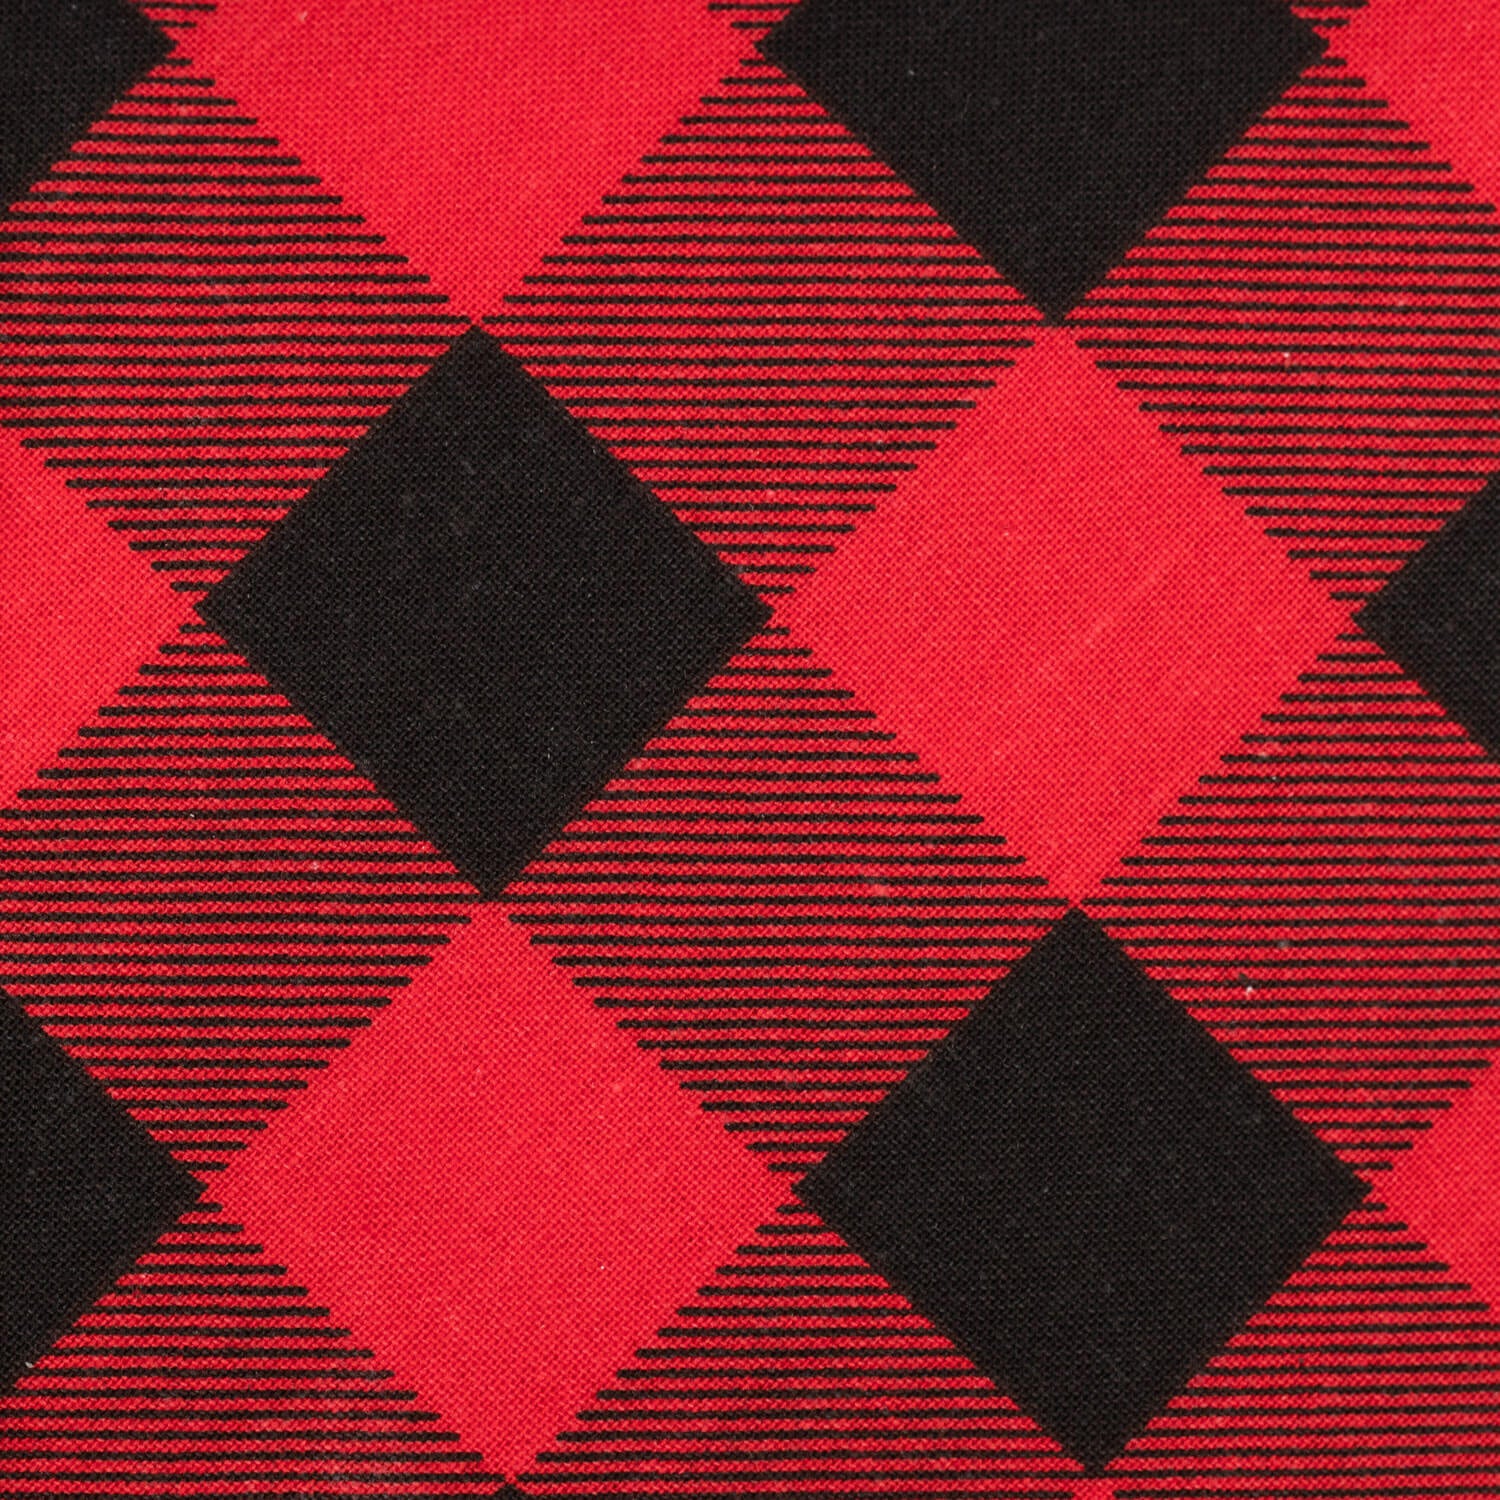 Black and red plaid pattern